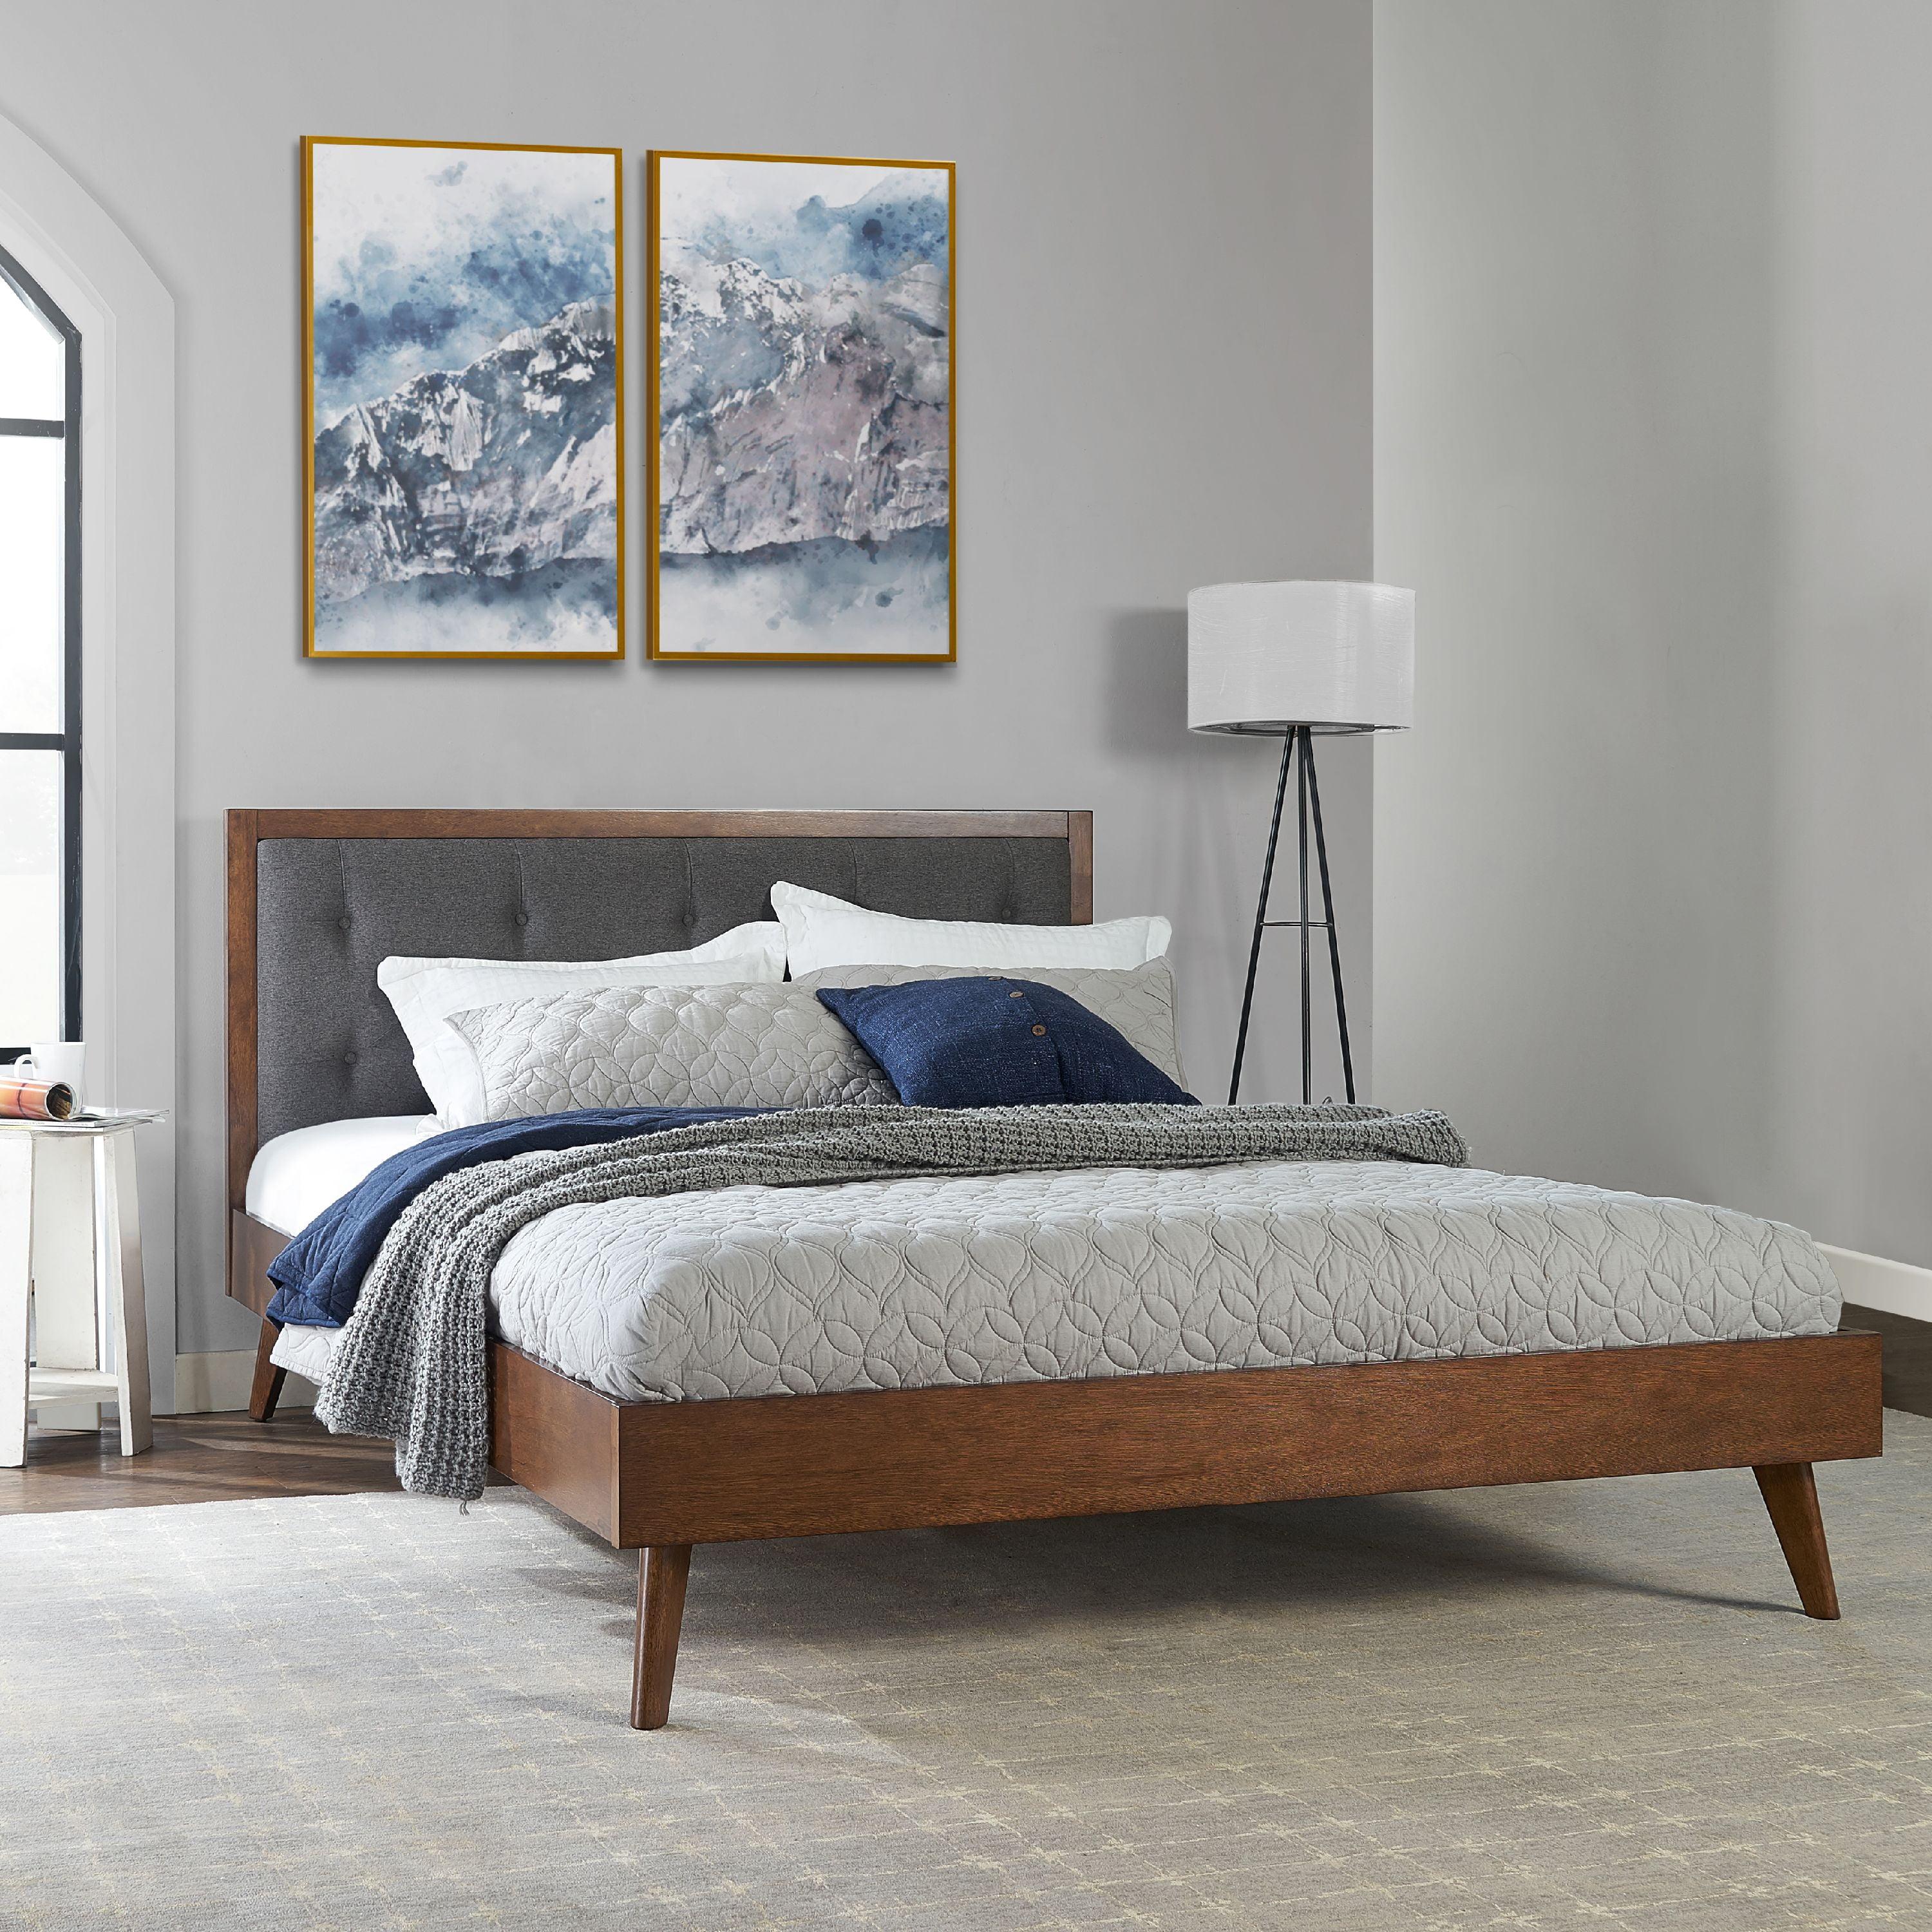 Elegant Walnut Queen Platform Bed with Tufted Gray Upholstery